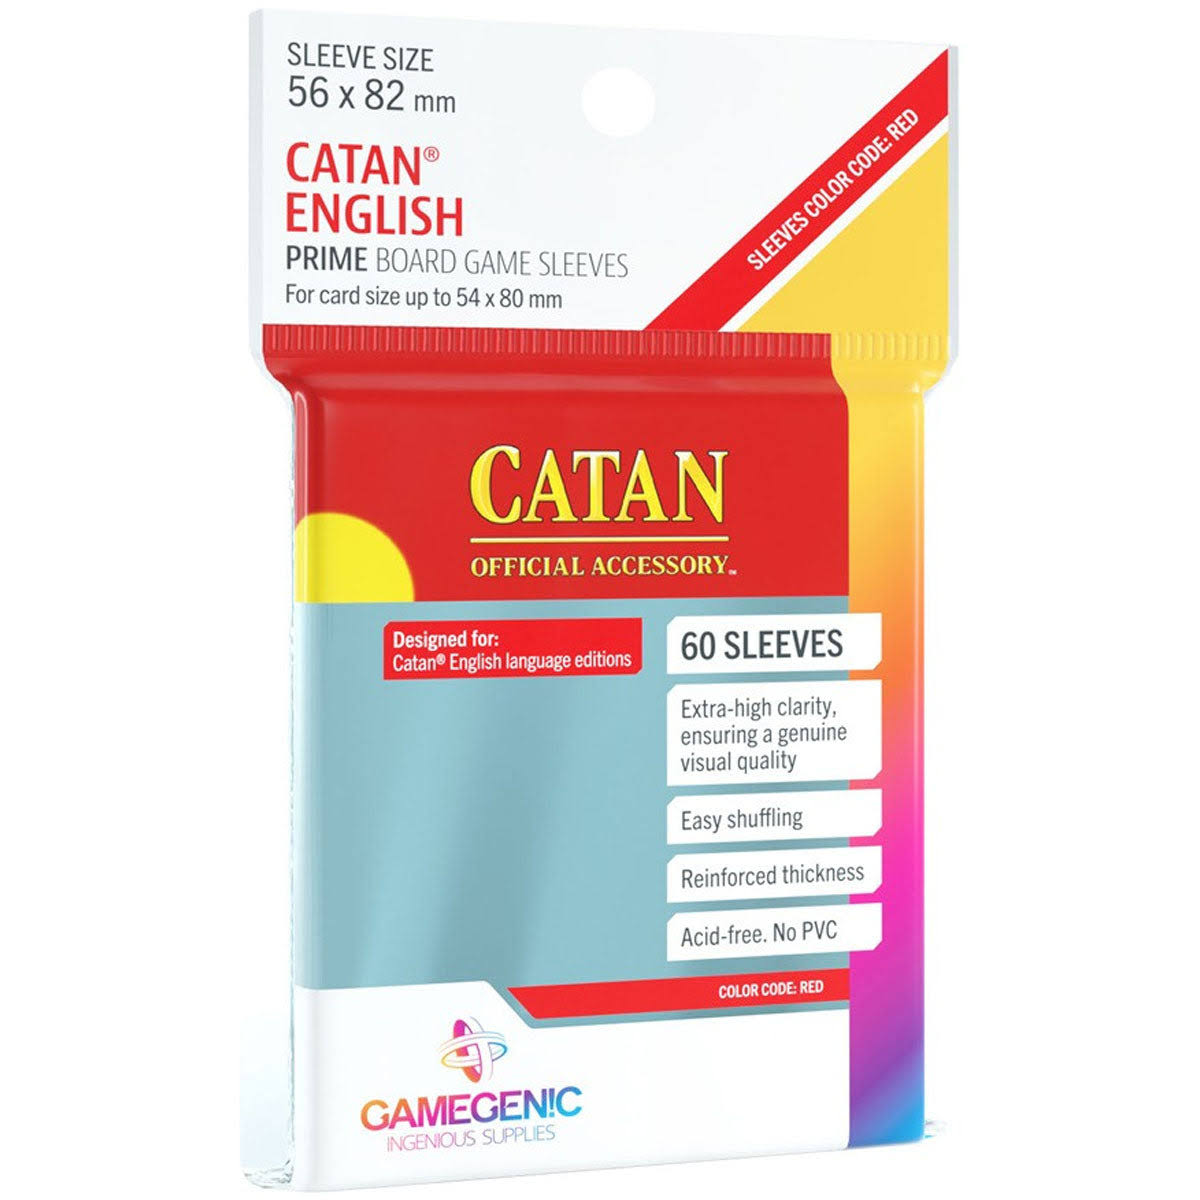 Gamegenic Prime Board Game Sleeves Catan English 56mm x 82mm 60pc